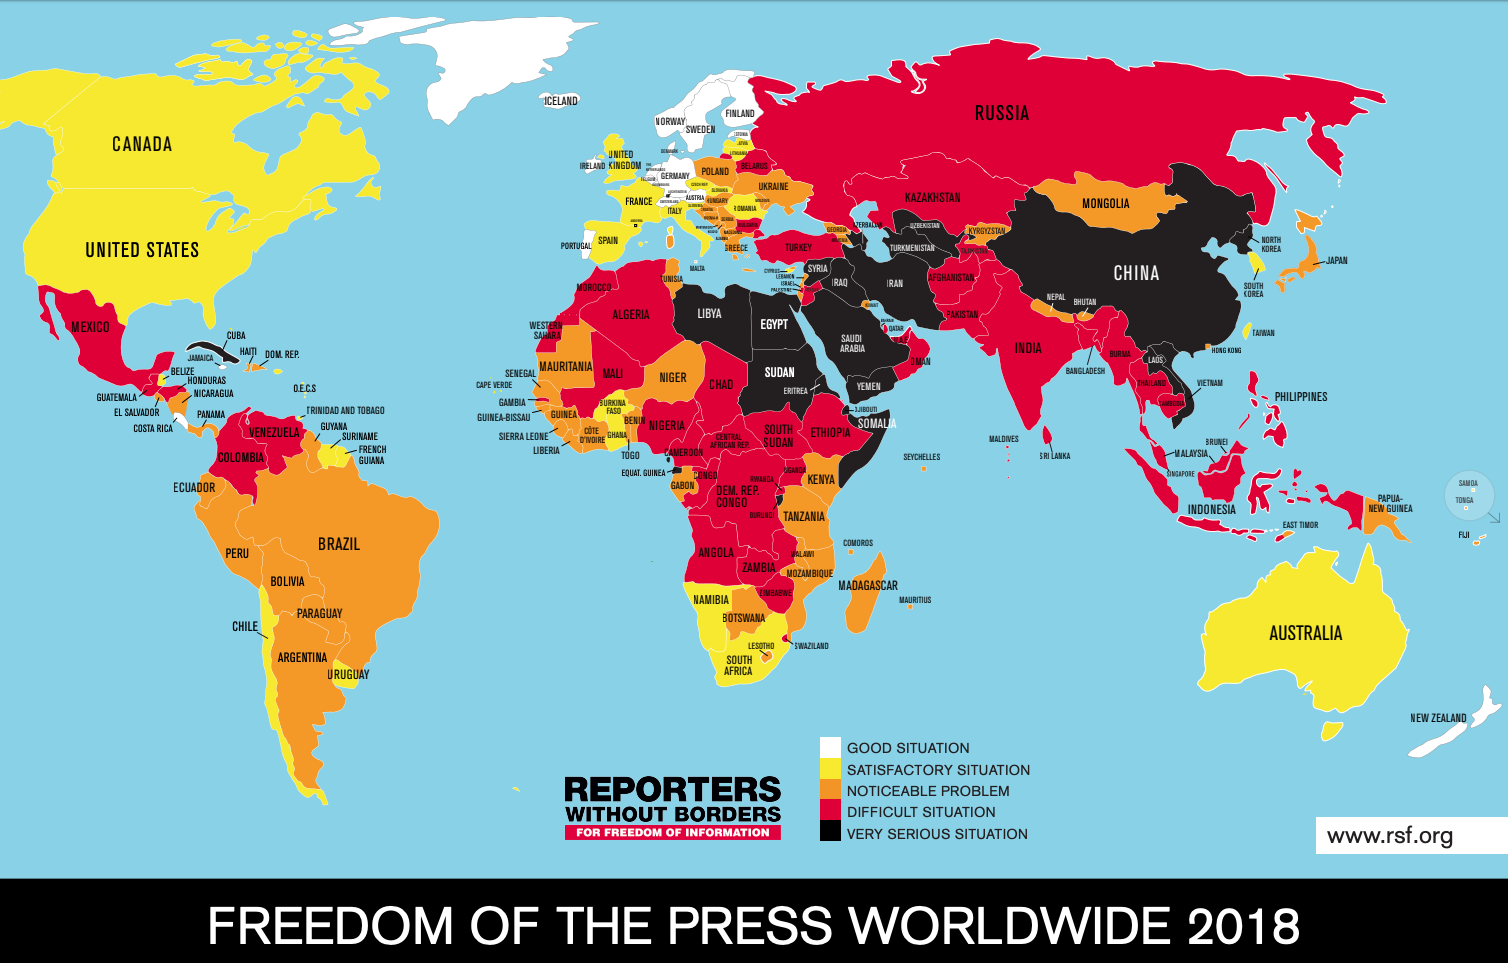 Reporters Without Borders (RSF) 2018 press freedom barometer